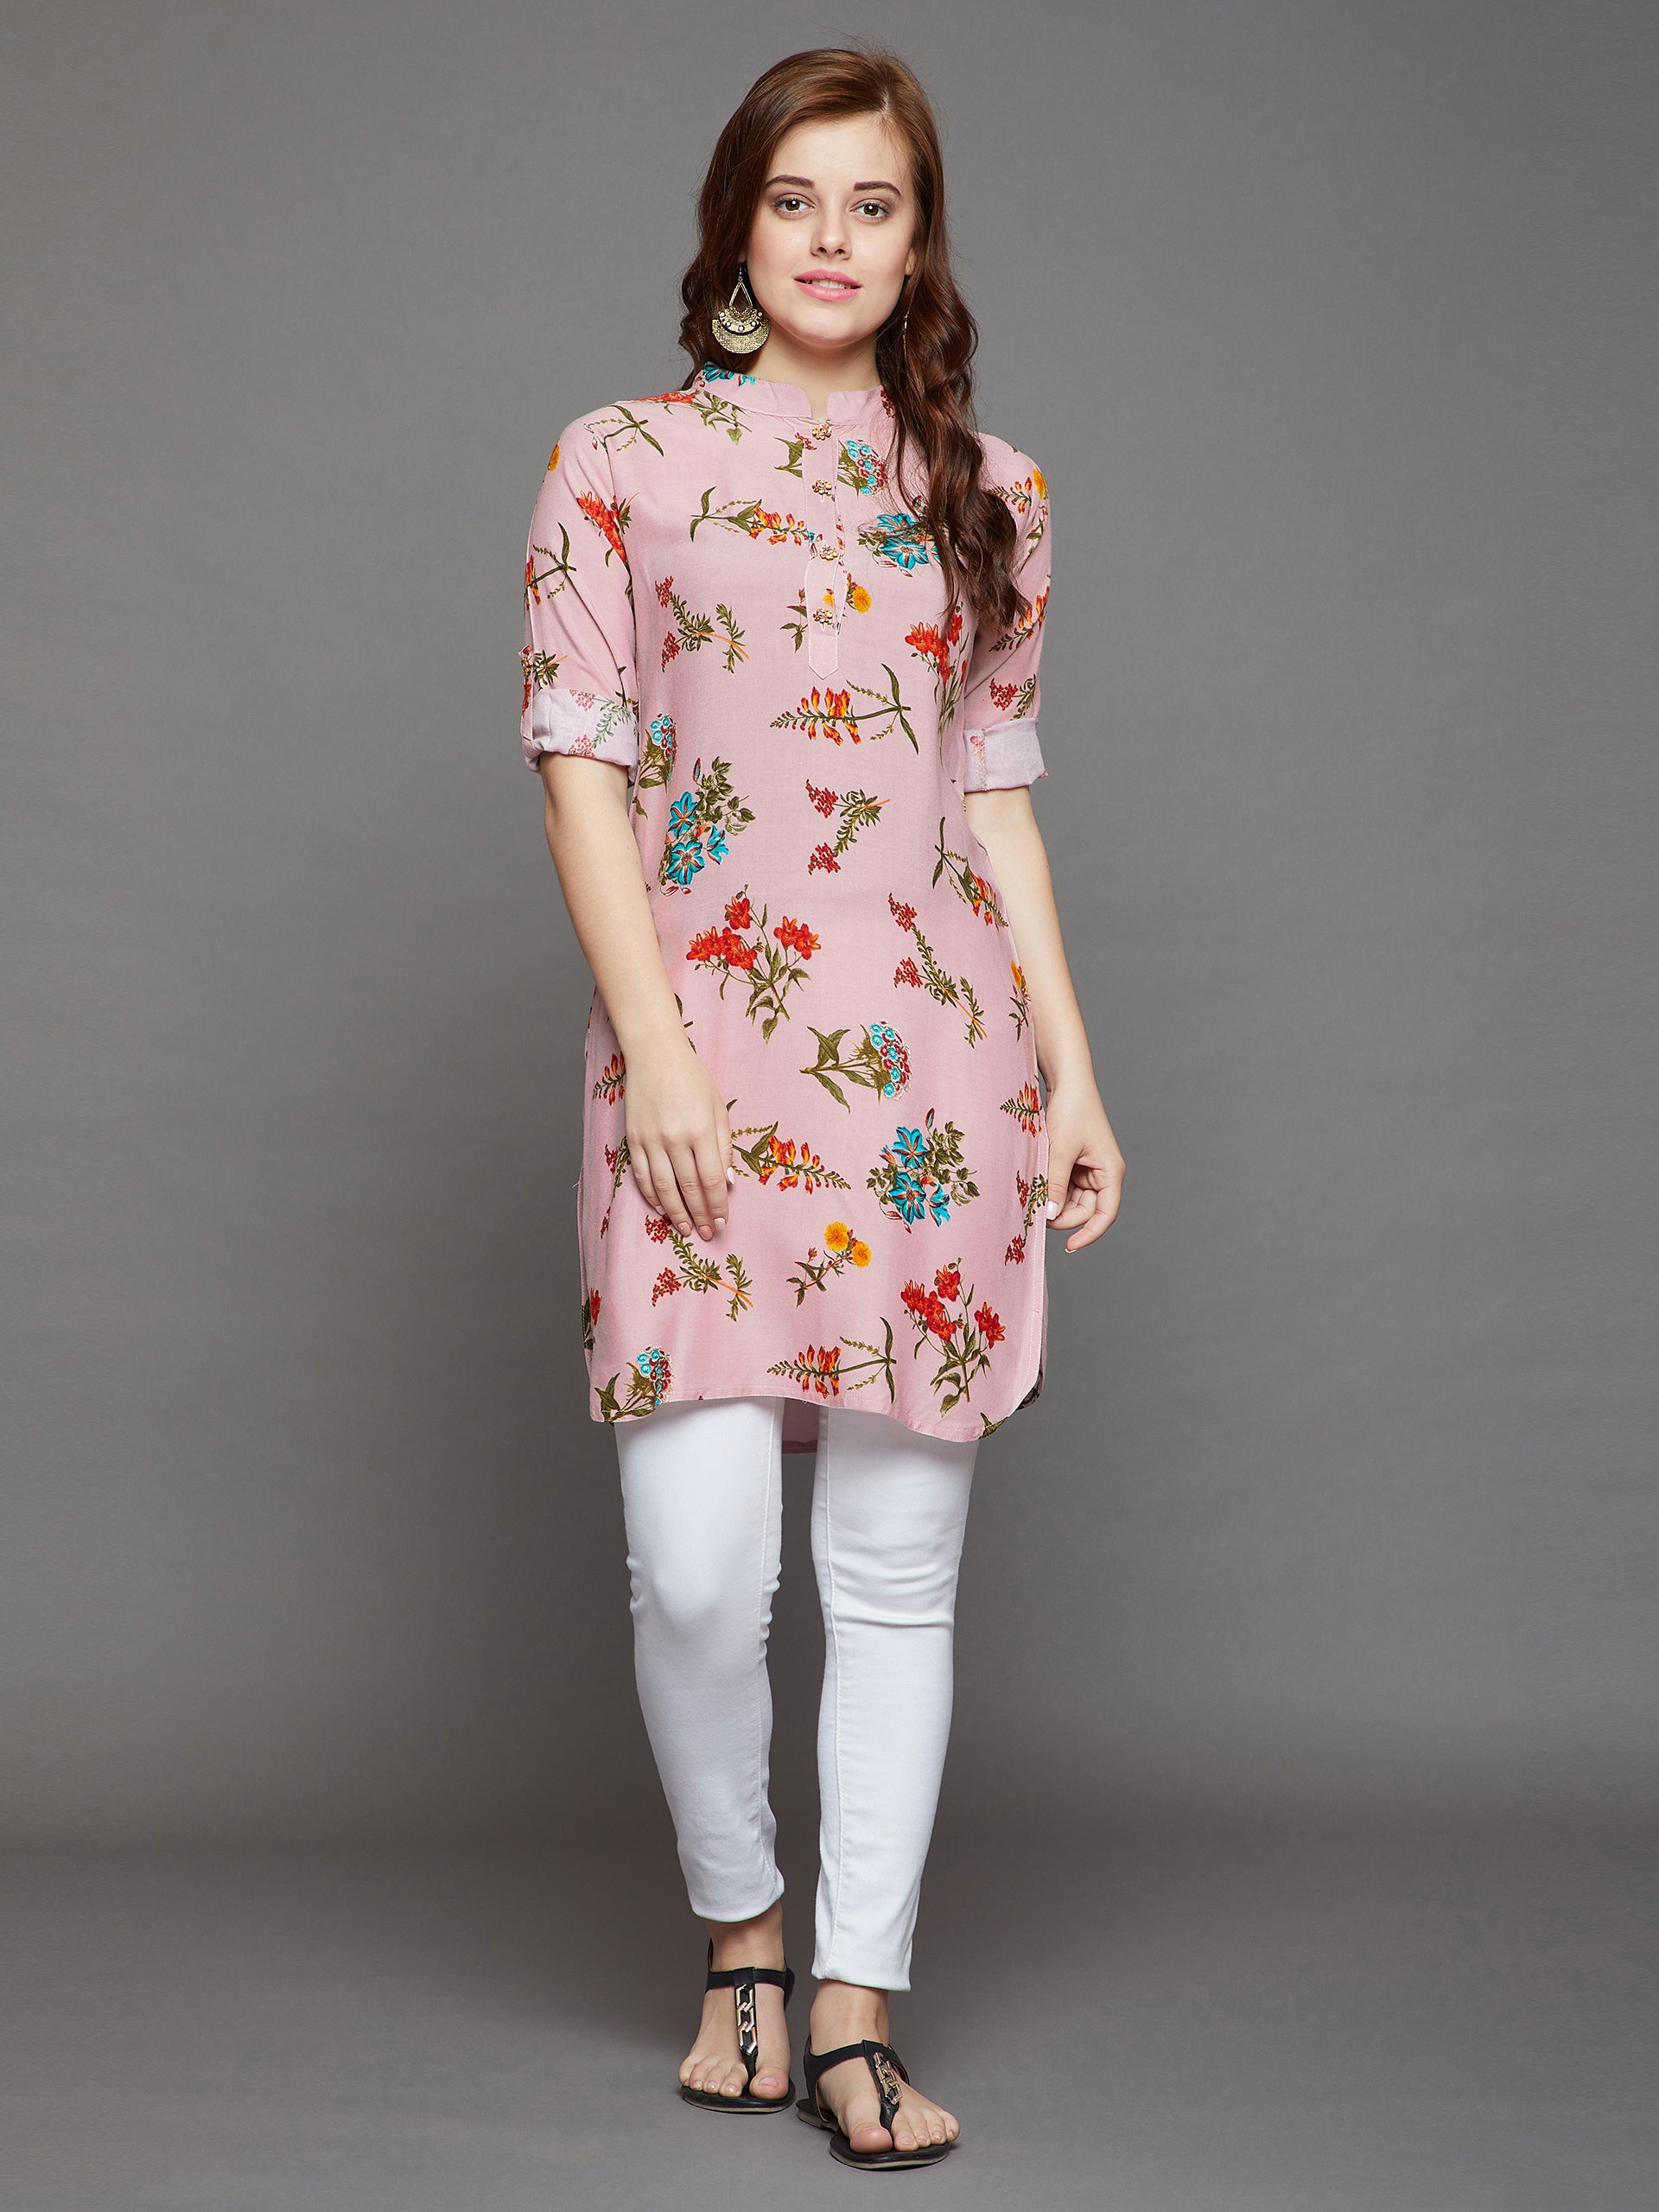 Buy Babru Cotton Digital Printed Regular Fit A Line Basic Button Stylish  Kurti for Women (Pink) (Small) at Amazon.in